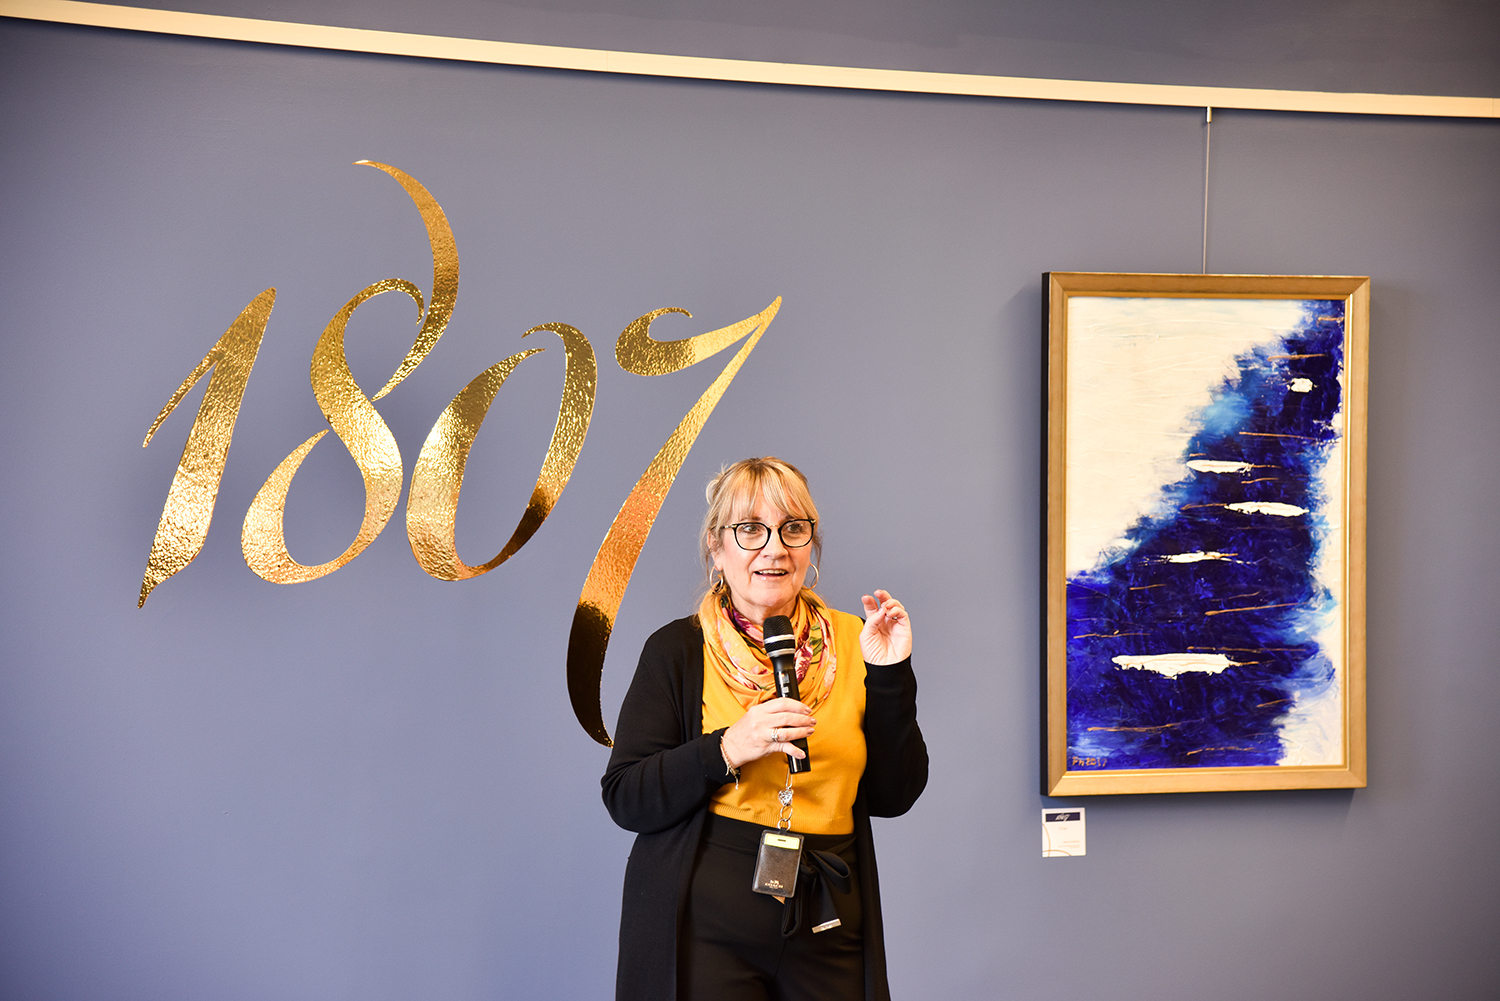 Patricia Hoffman in front of her artwork